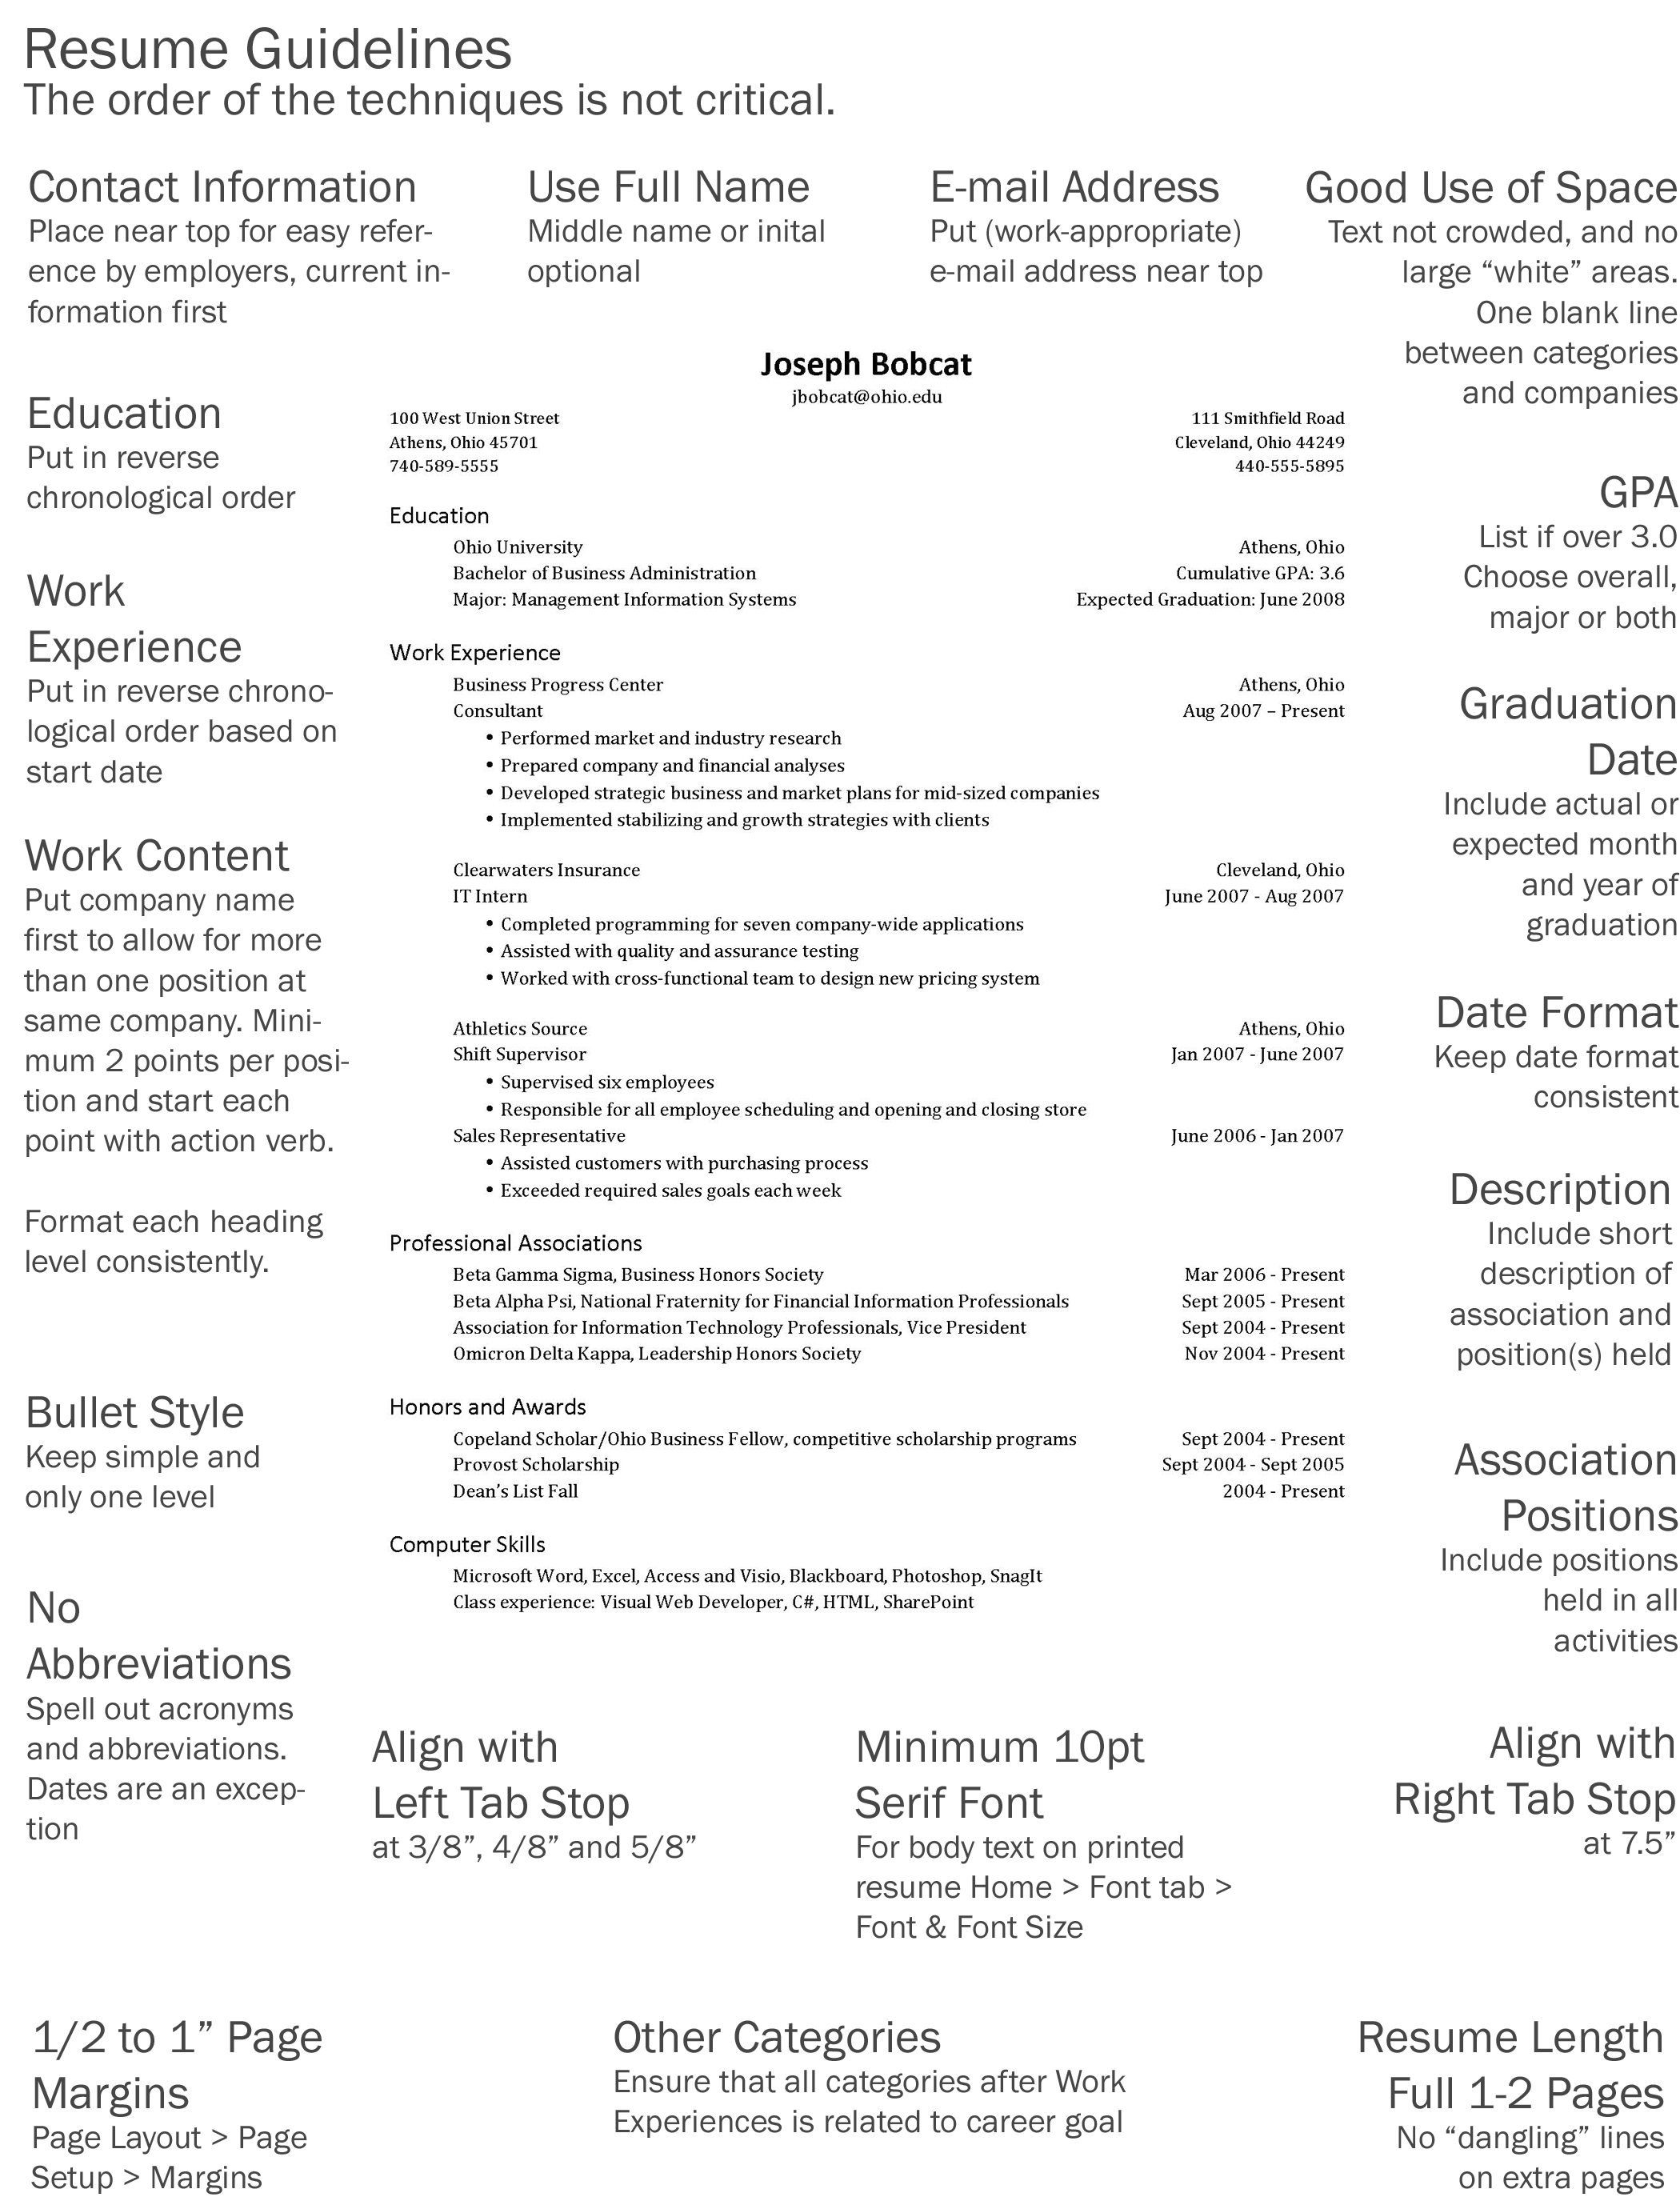 resume examples with personal interests